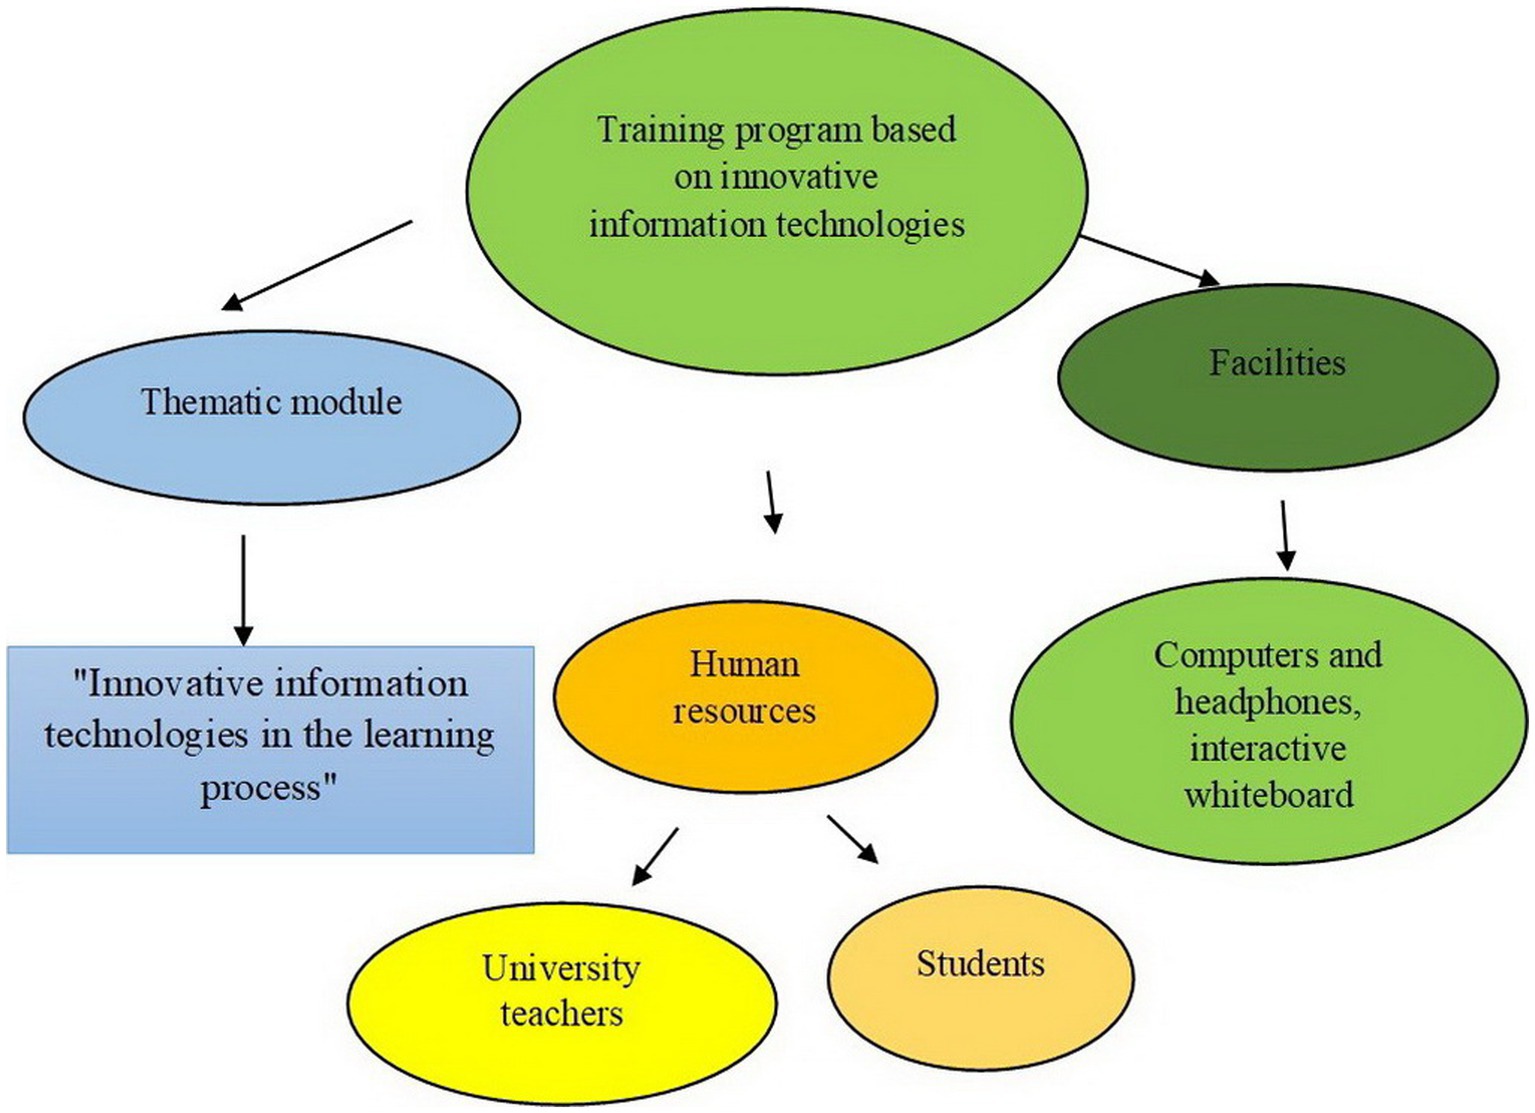 The effect of games and simulations on higher education: a systematic  literature review, International Journal of Educational Technology in  Higher Education